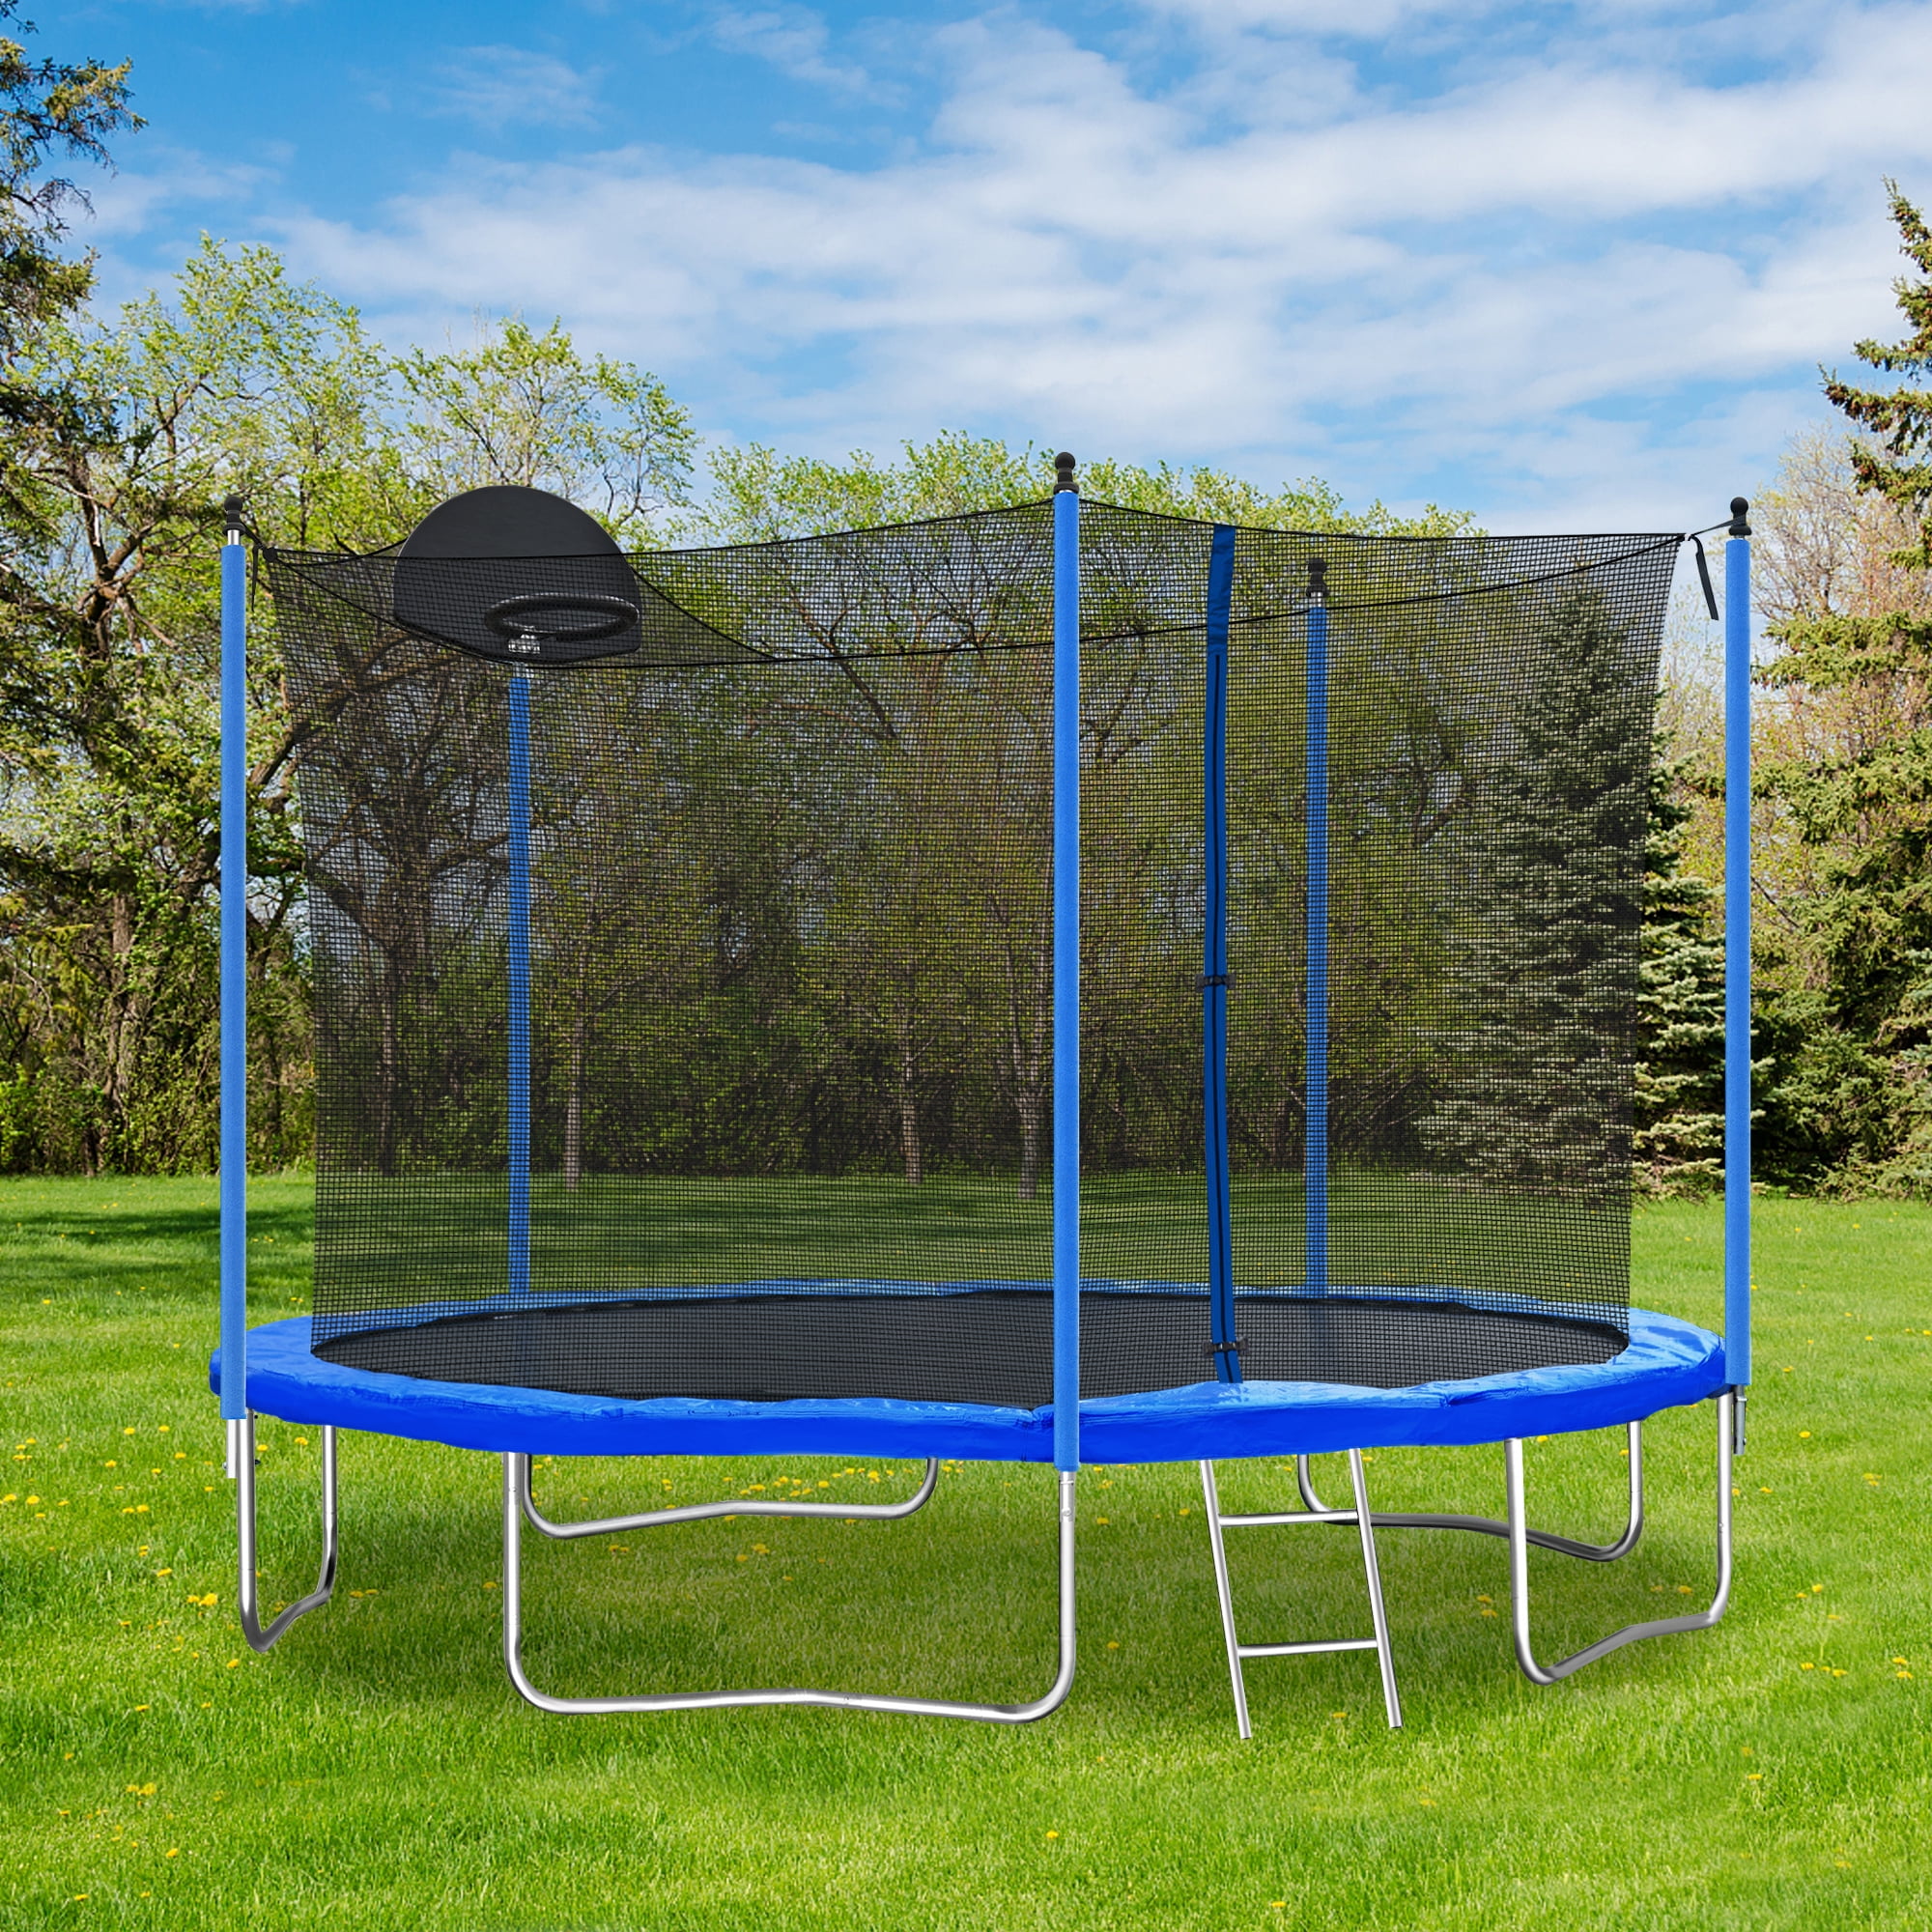 12FT Trampoline with Enclosure Net and Ladder, 2022 Version Outdoor Recreational Combo Bounce Trampoline for Kids and Trampoline with Waterproof Jump Mat for Indoor Outdoor Backyard, JA2130 - Walmart.com